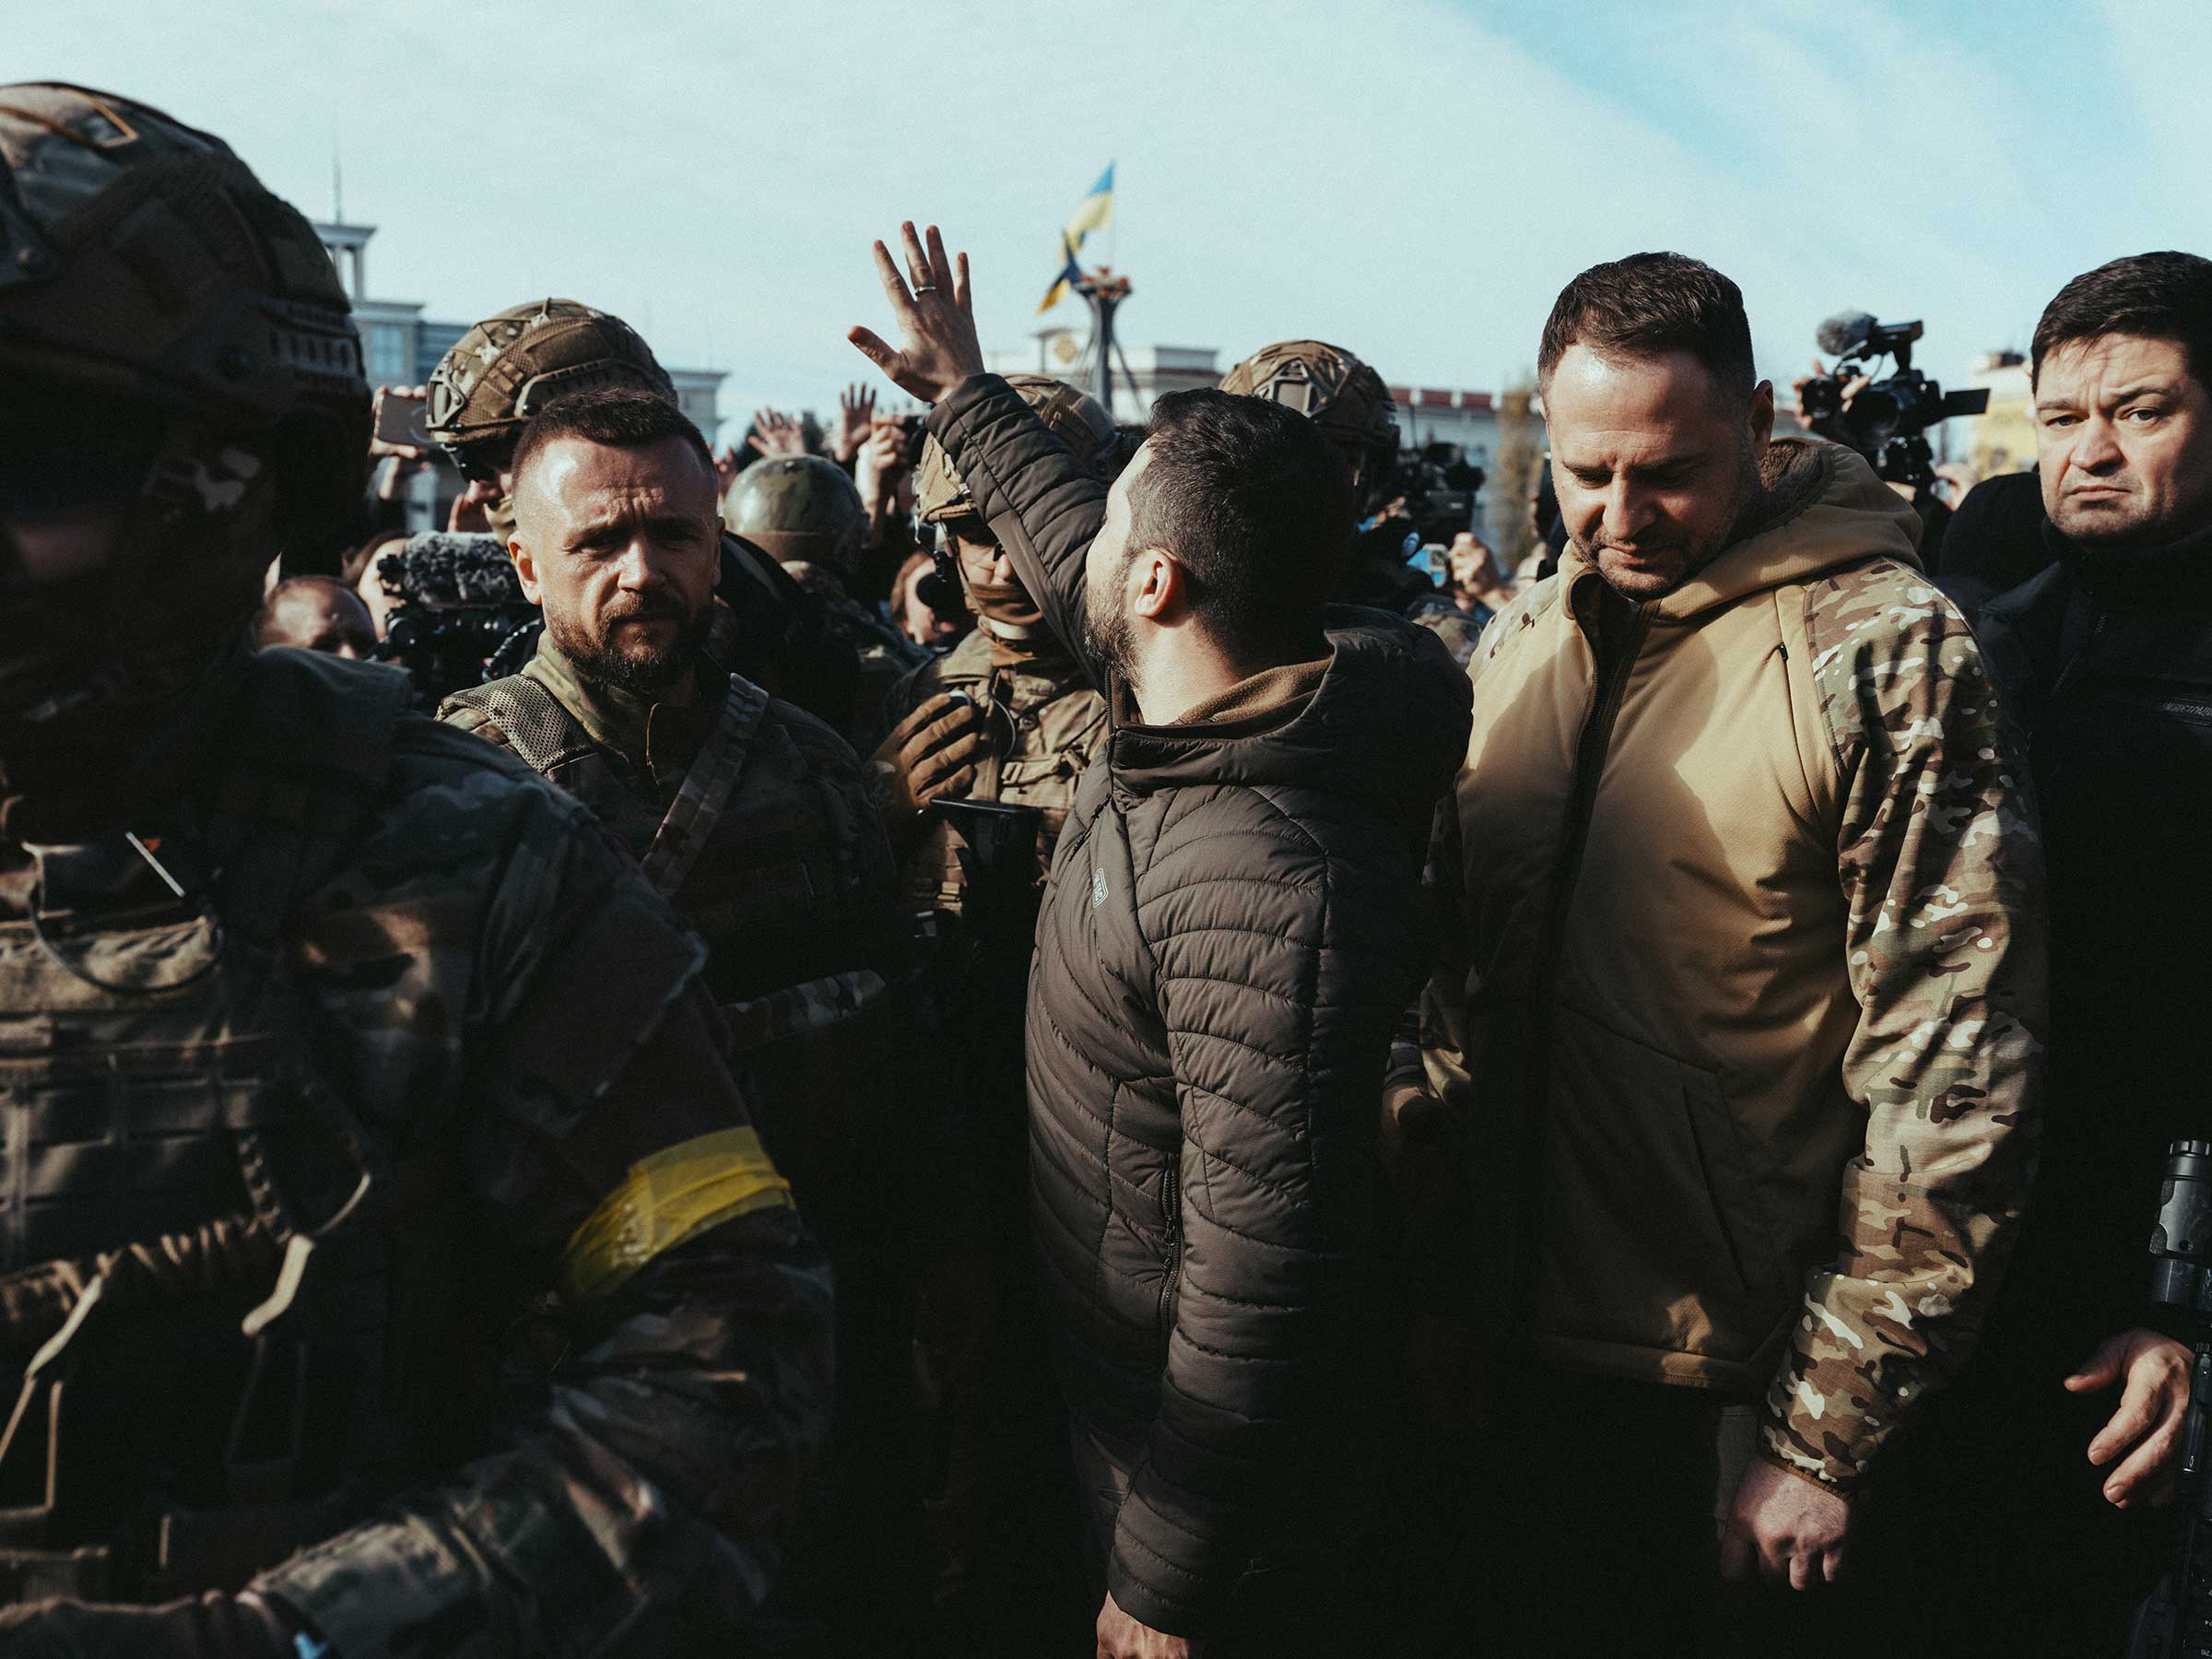 Zelensky greets the crowd during his visit to the liberated city of Kherson on Nov. 14. (Maxim Dondyuk for TIME)